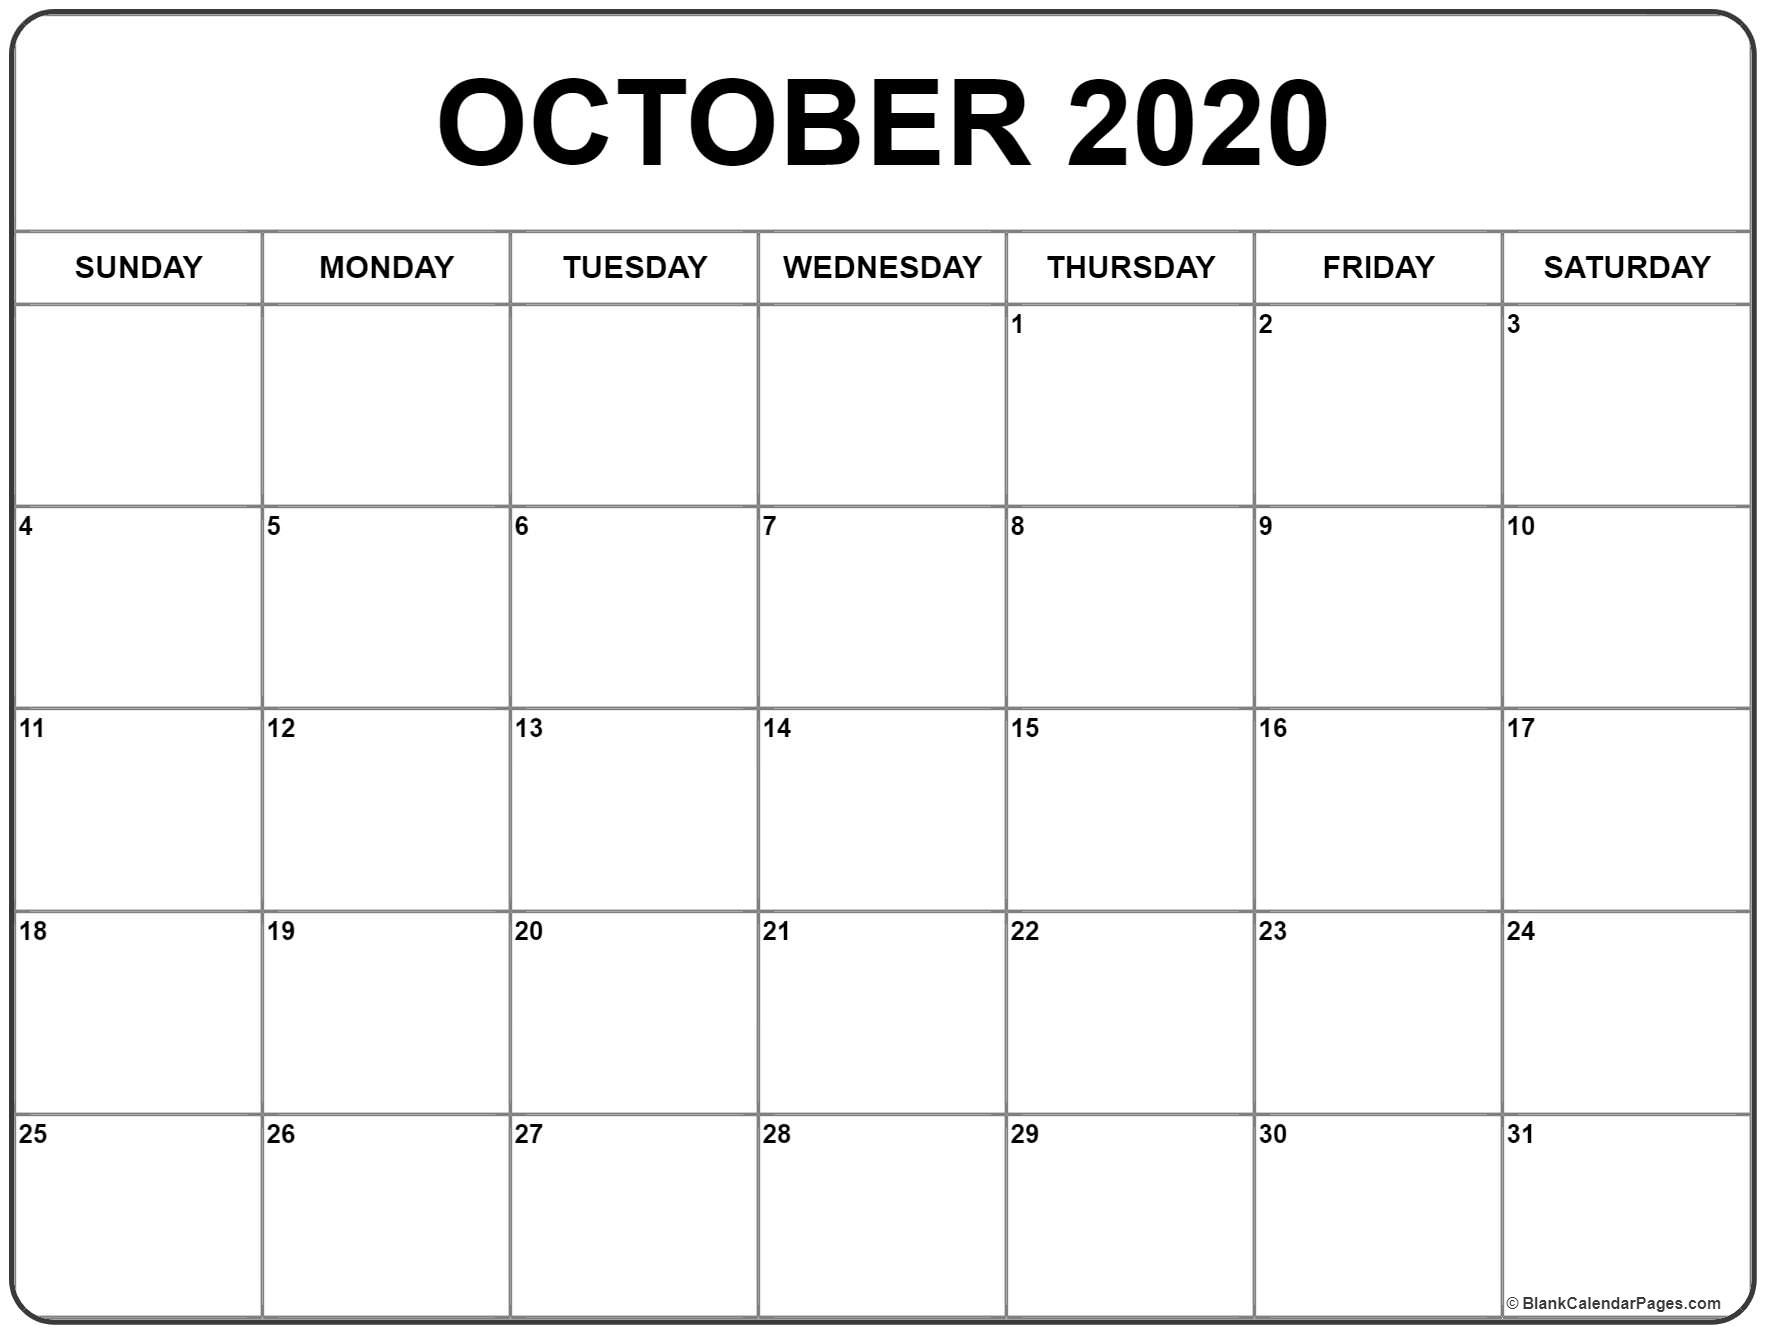 October 2020 Calendar | Free Printable Monthly Calendars-October 2020 Monthly Calendar Blank Printable